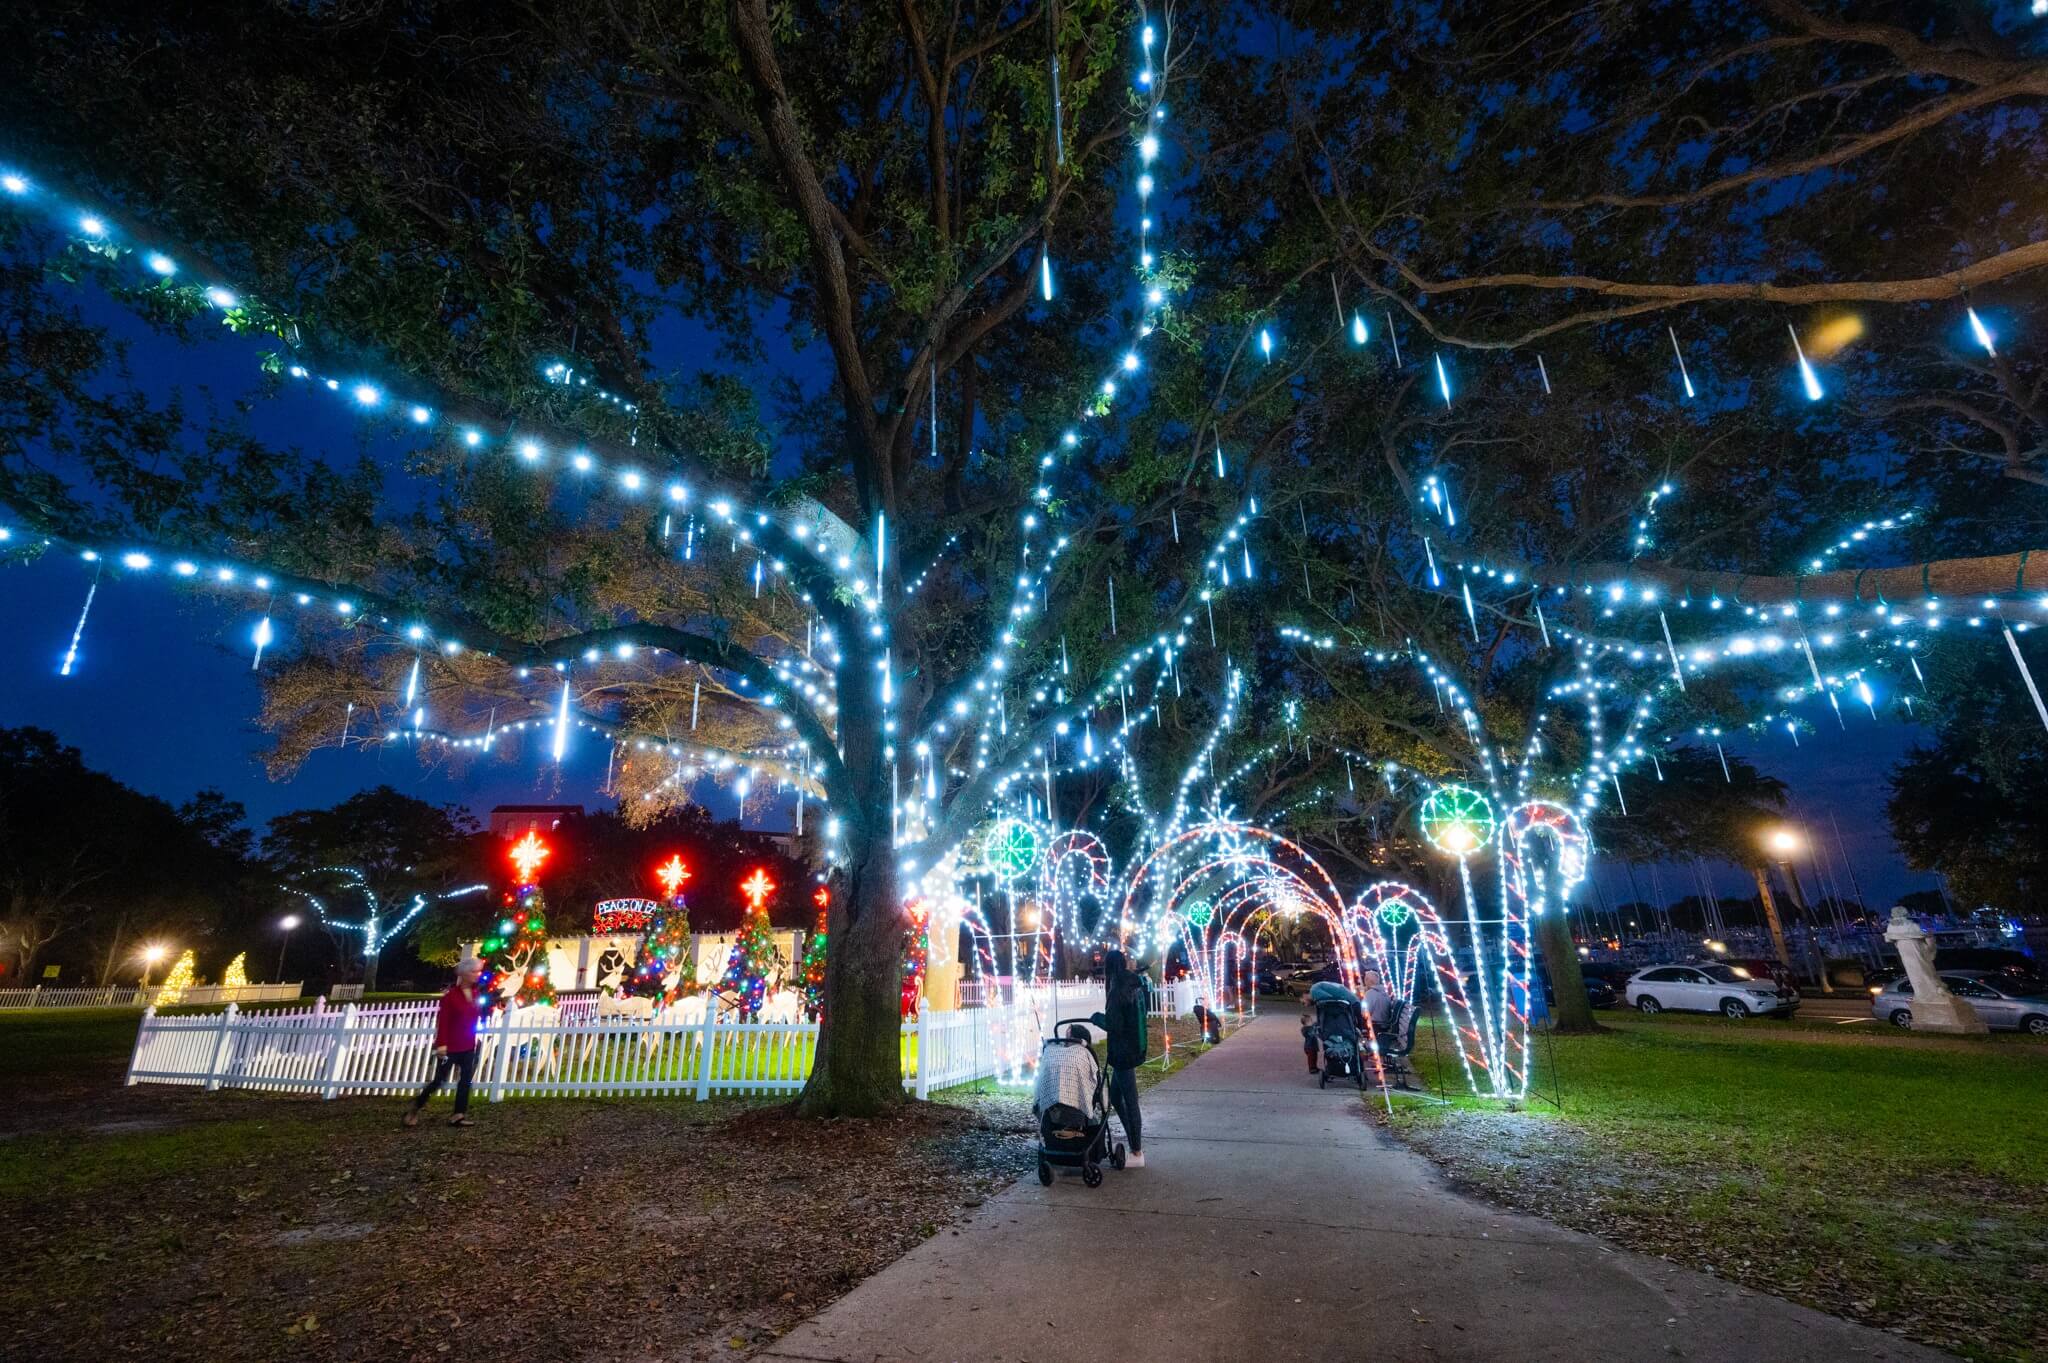 Christmas lights put up on trees in a park.